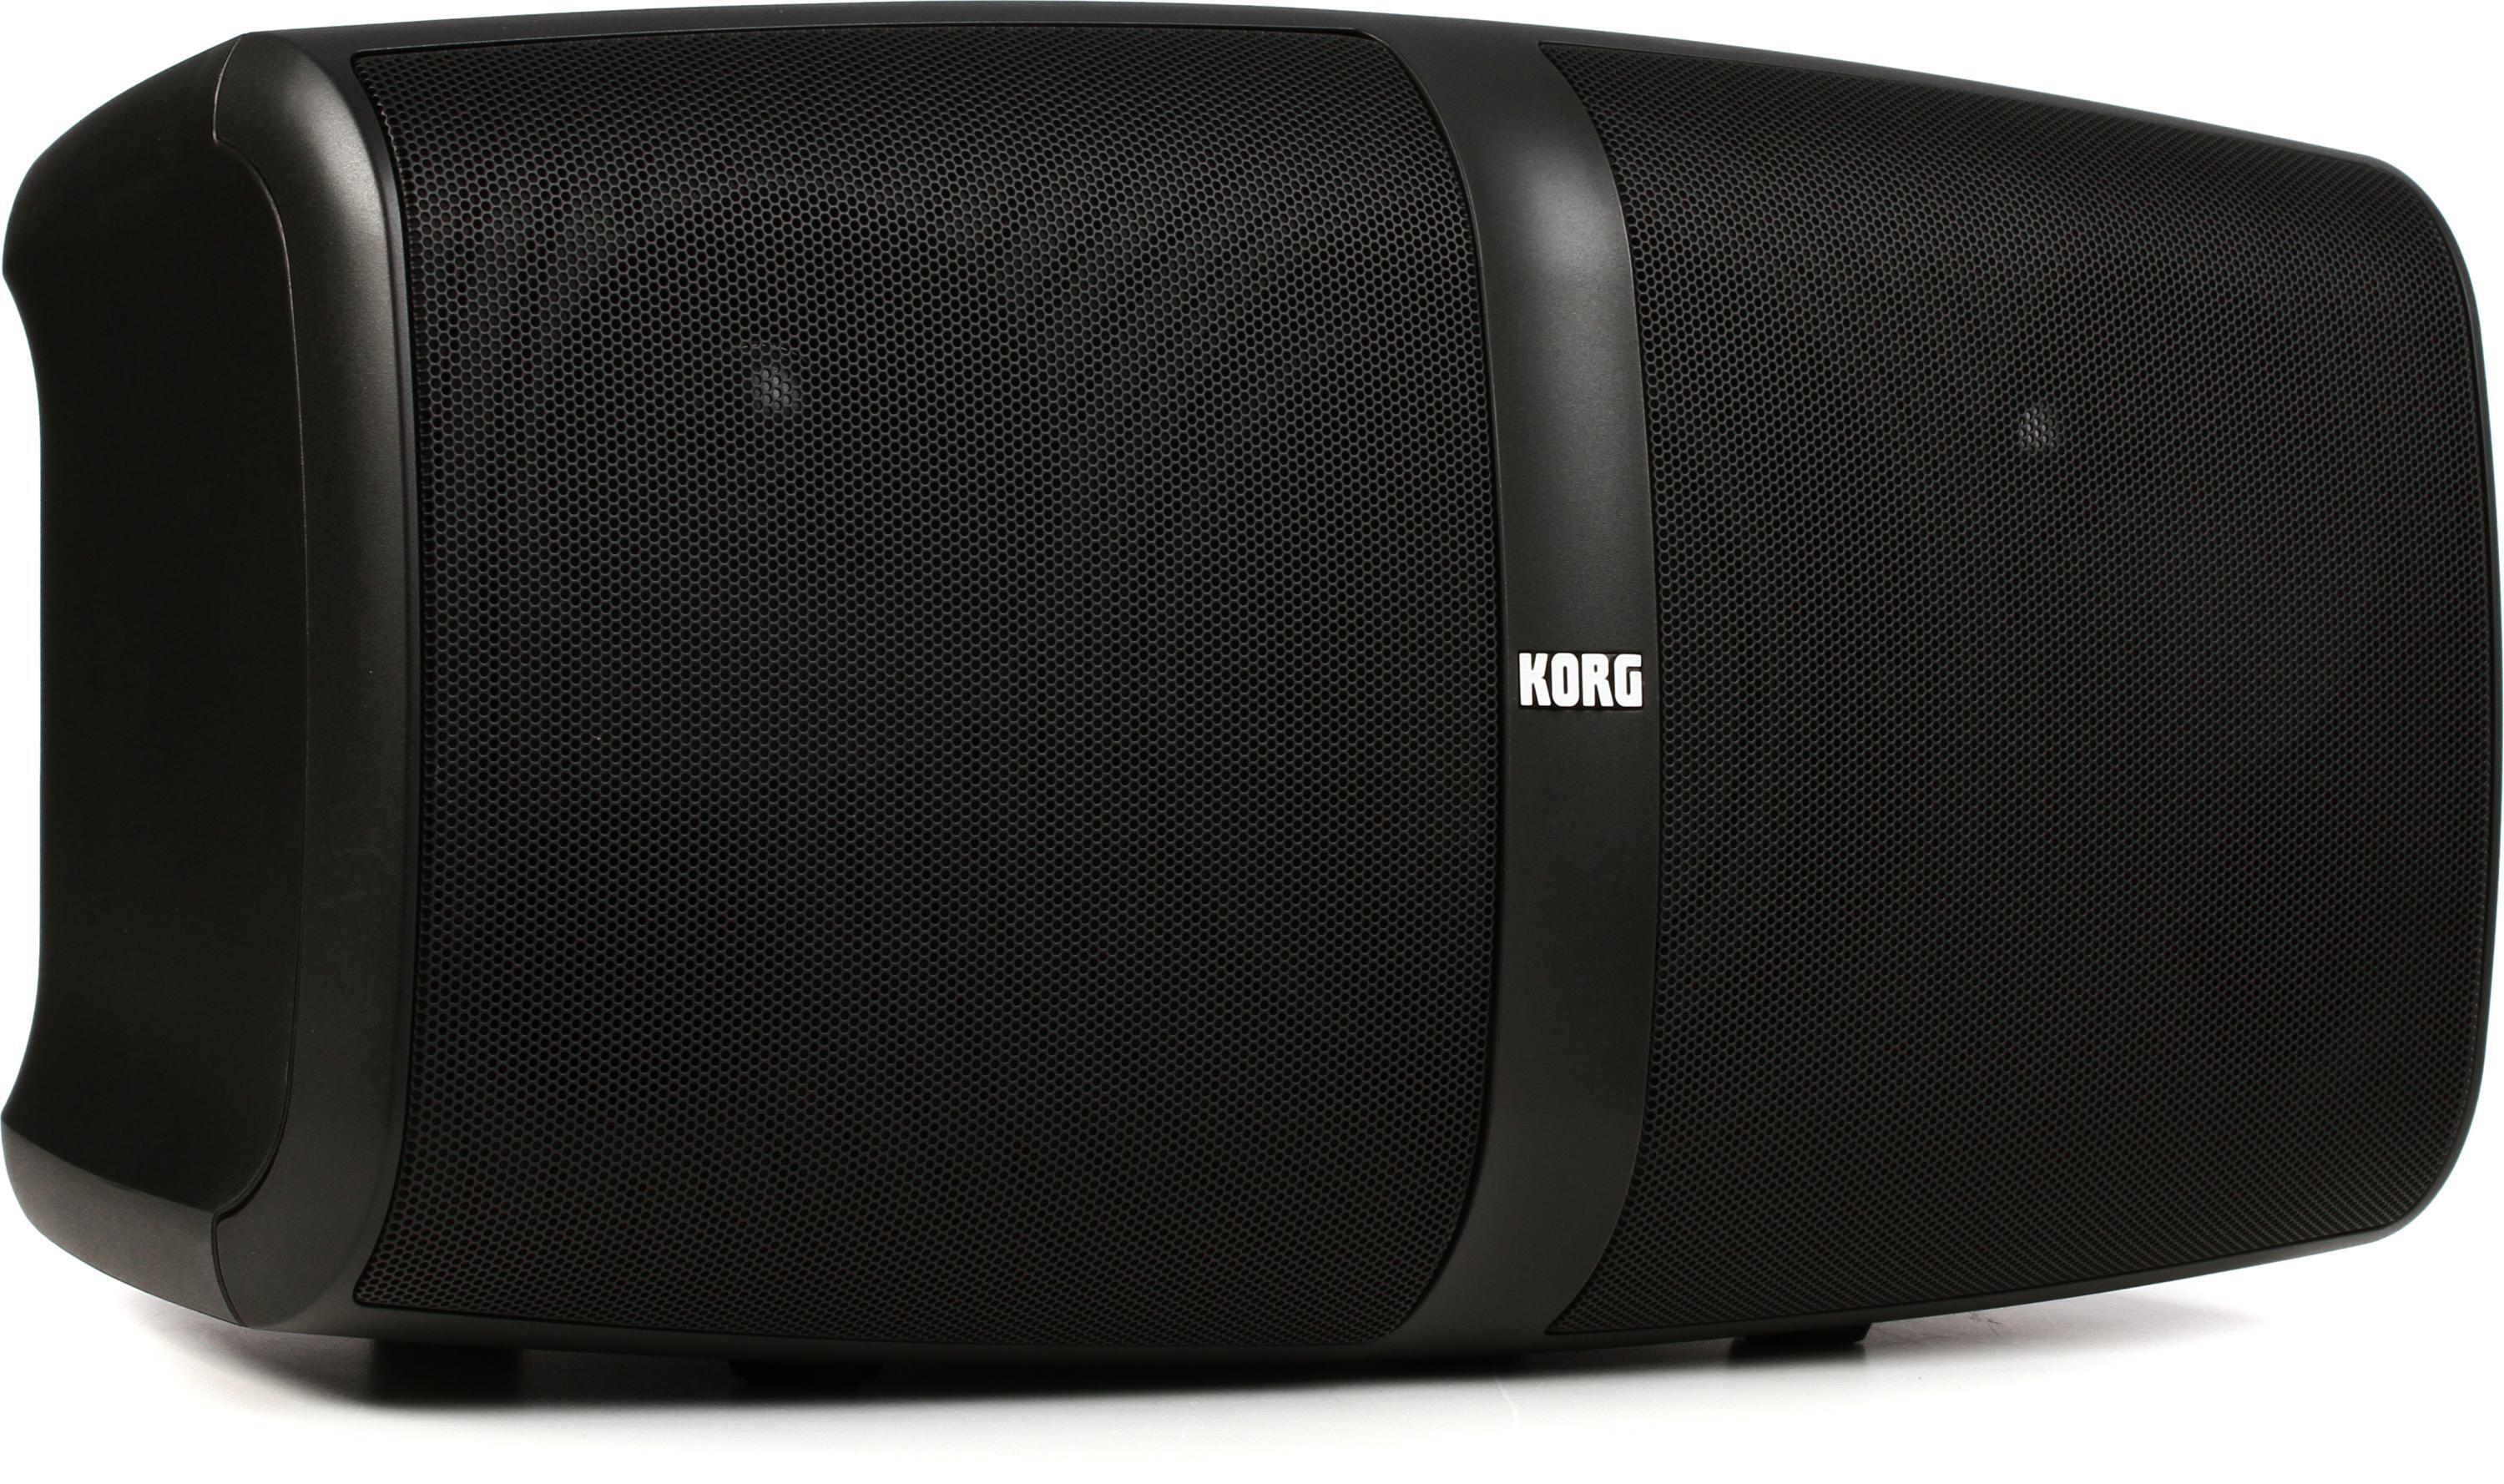 Korg KONNECT Portable Stereo PA System with Bluetooth Reviews 